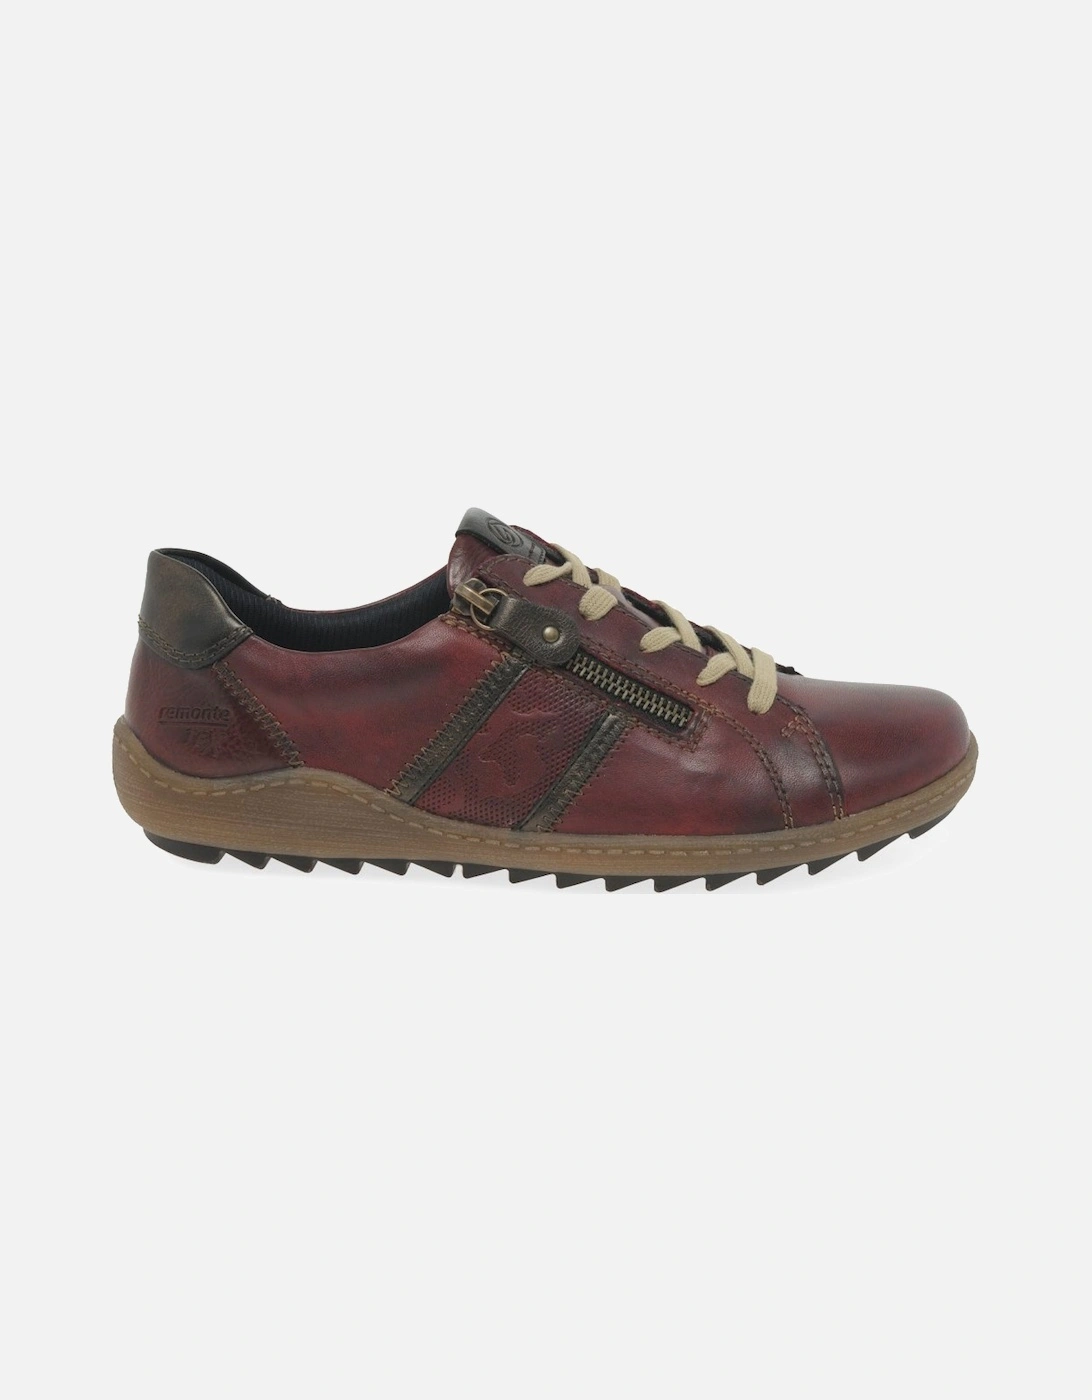 Calwell Womens Shoes